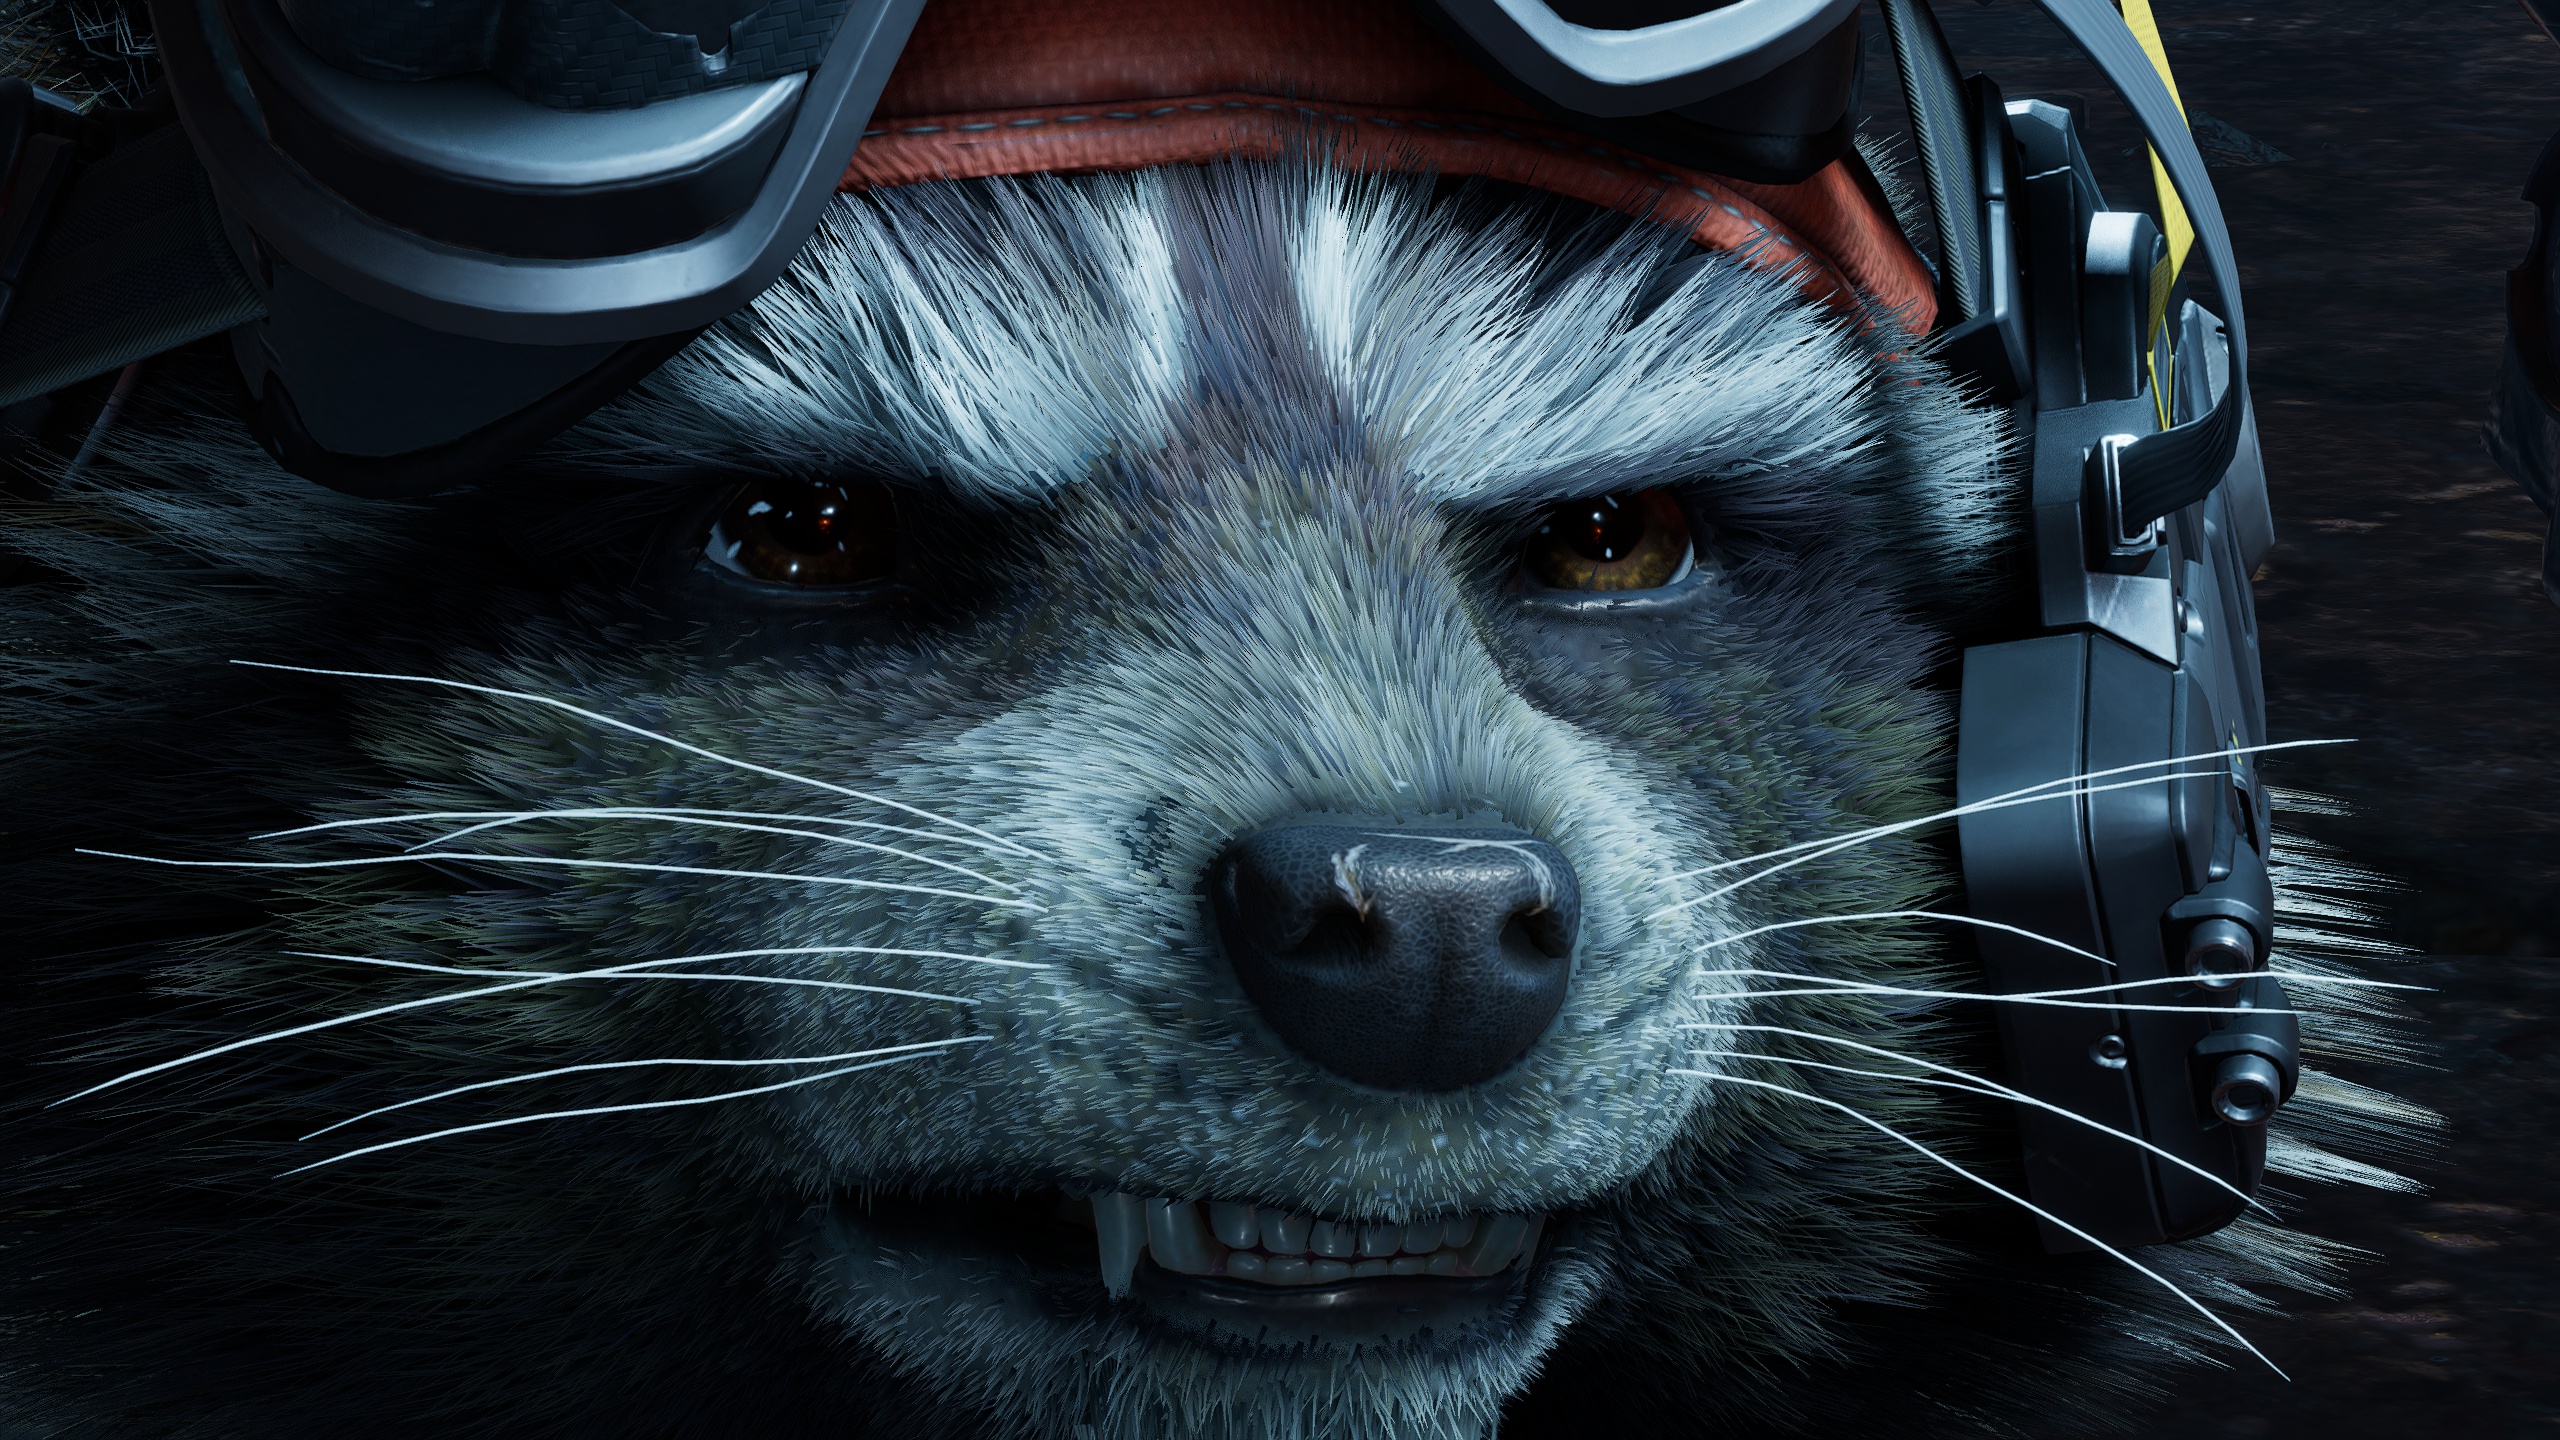 General 2560x1440 Guardians of the Galaxy Guardians of the Galaxy (Game) Rocket Raccoon digital art closeup video games video game art screen shot video game characters CGI whiskers raccoons teeth face nose